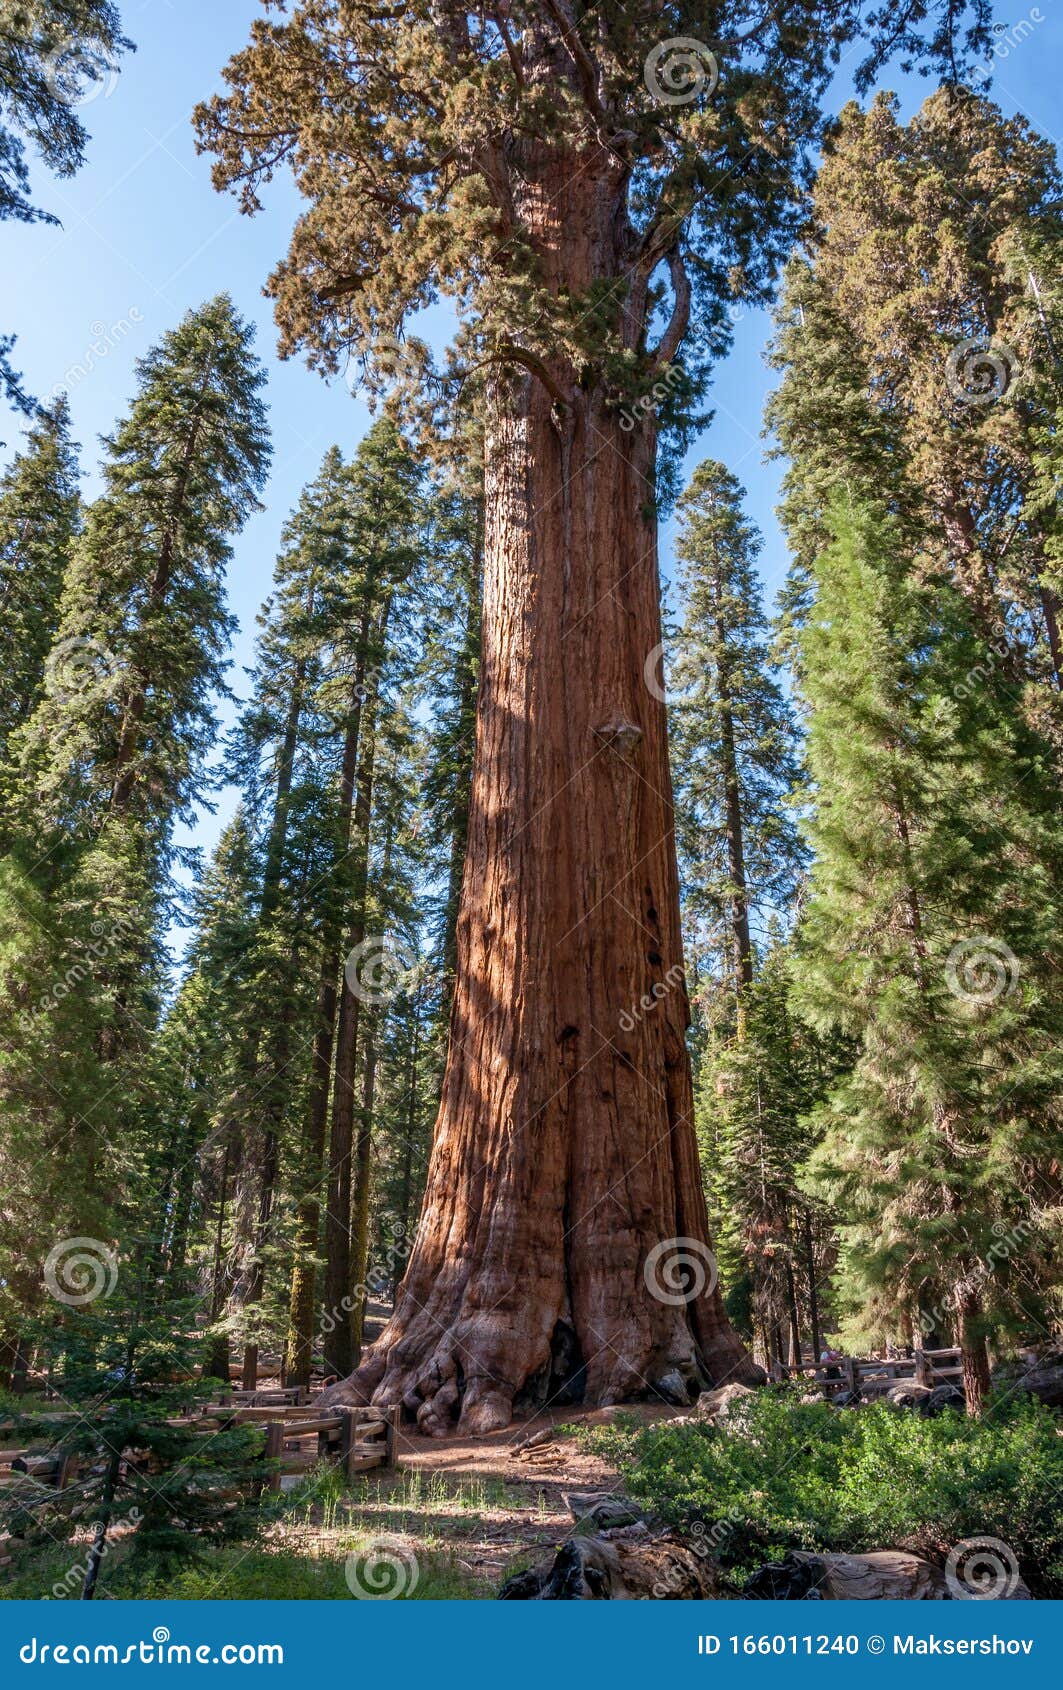 giant and centuries-old sequoias in the forest of sequoia national park, california, usa